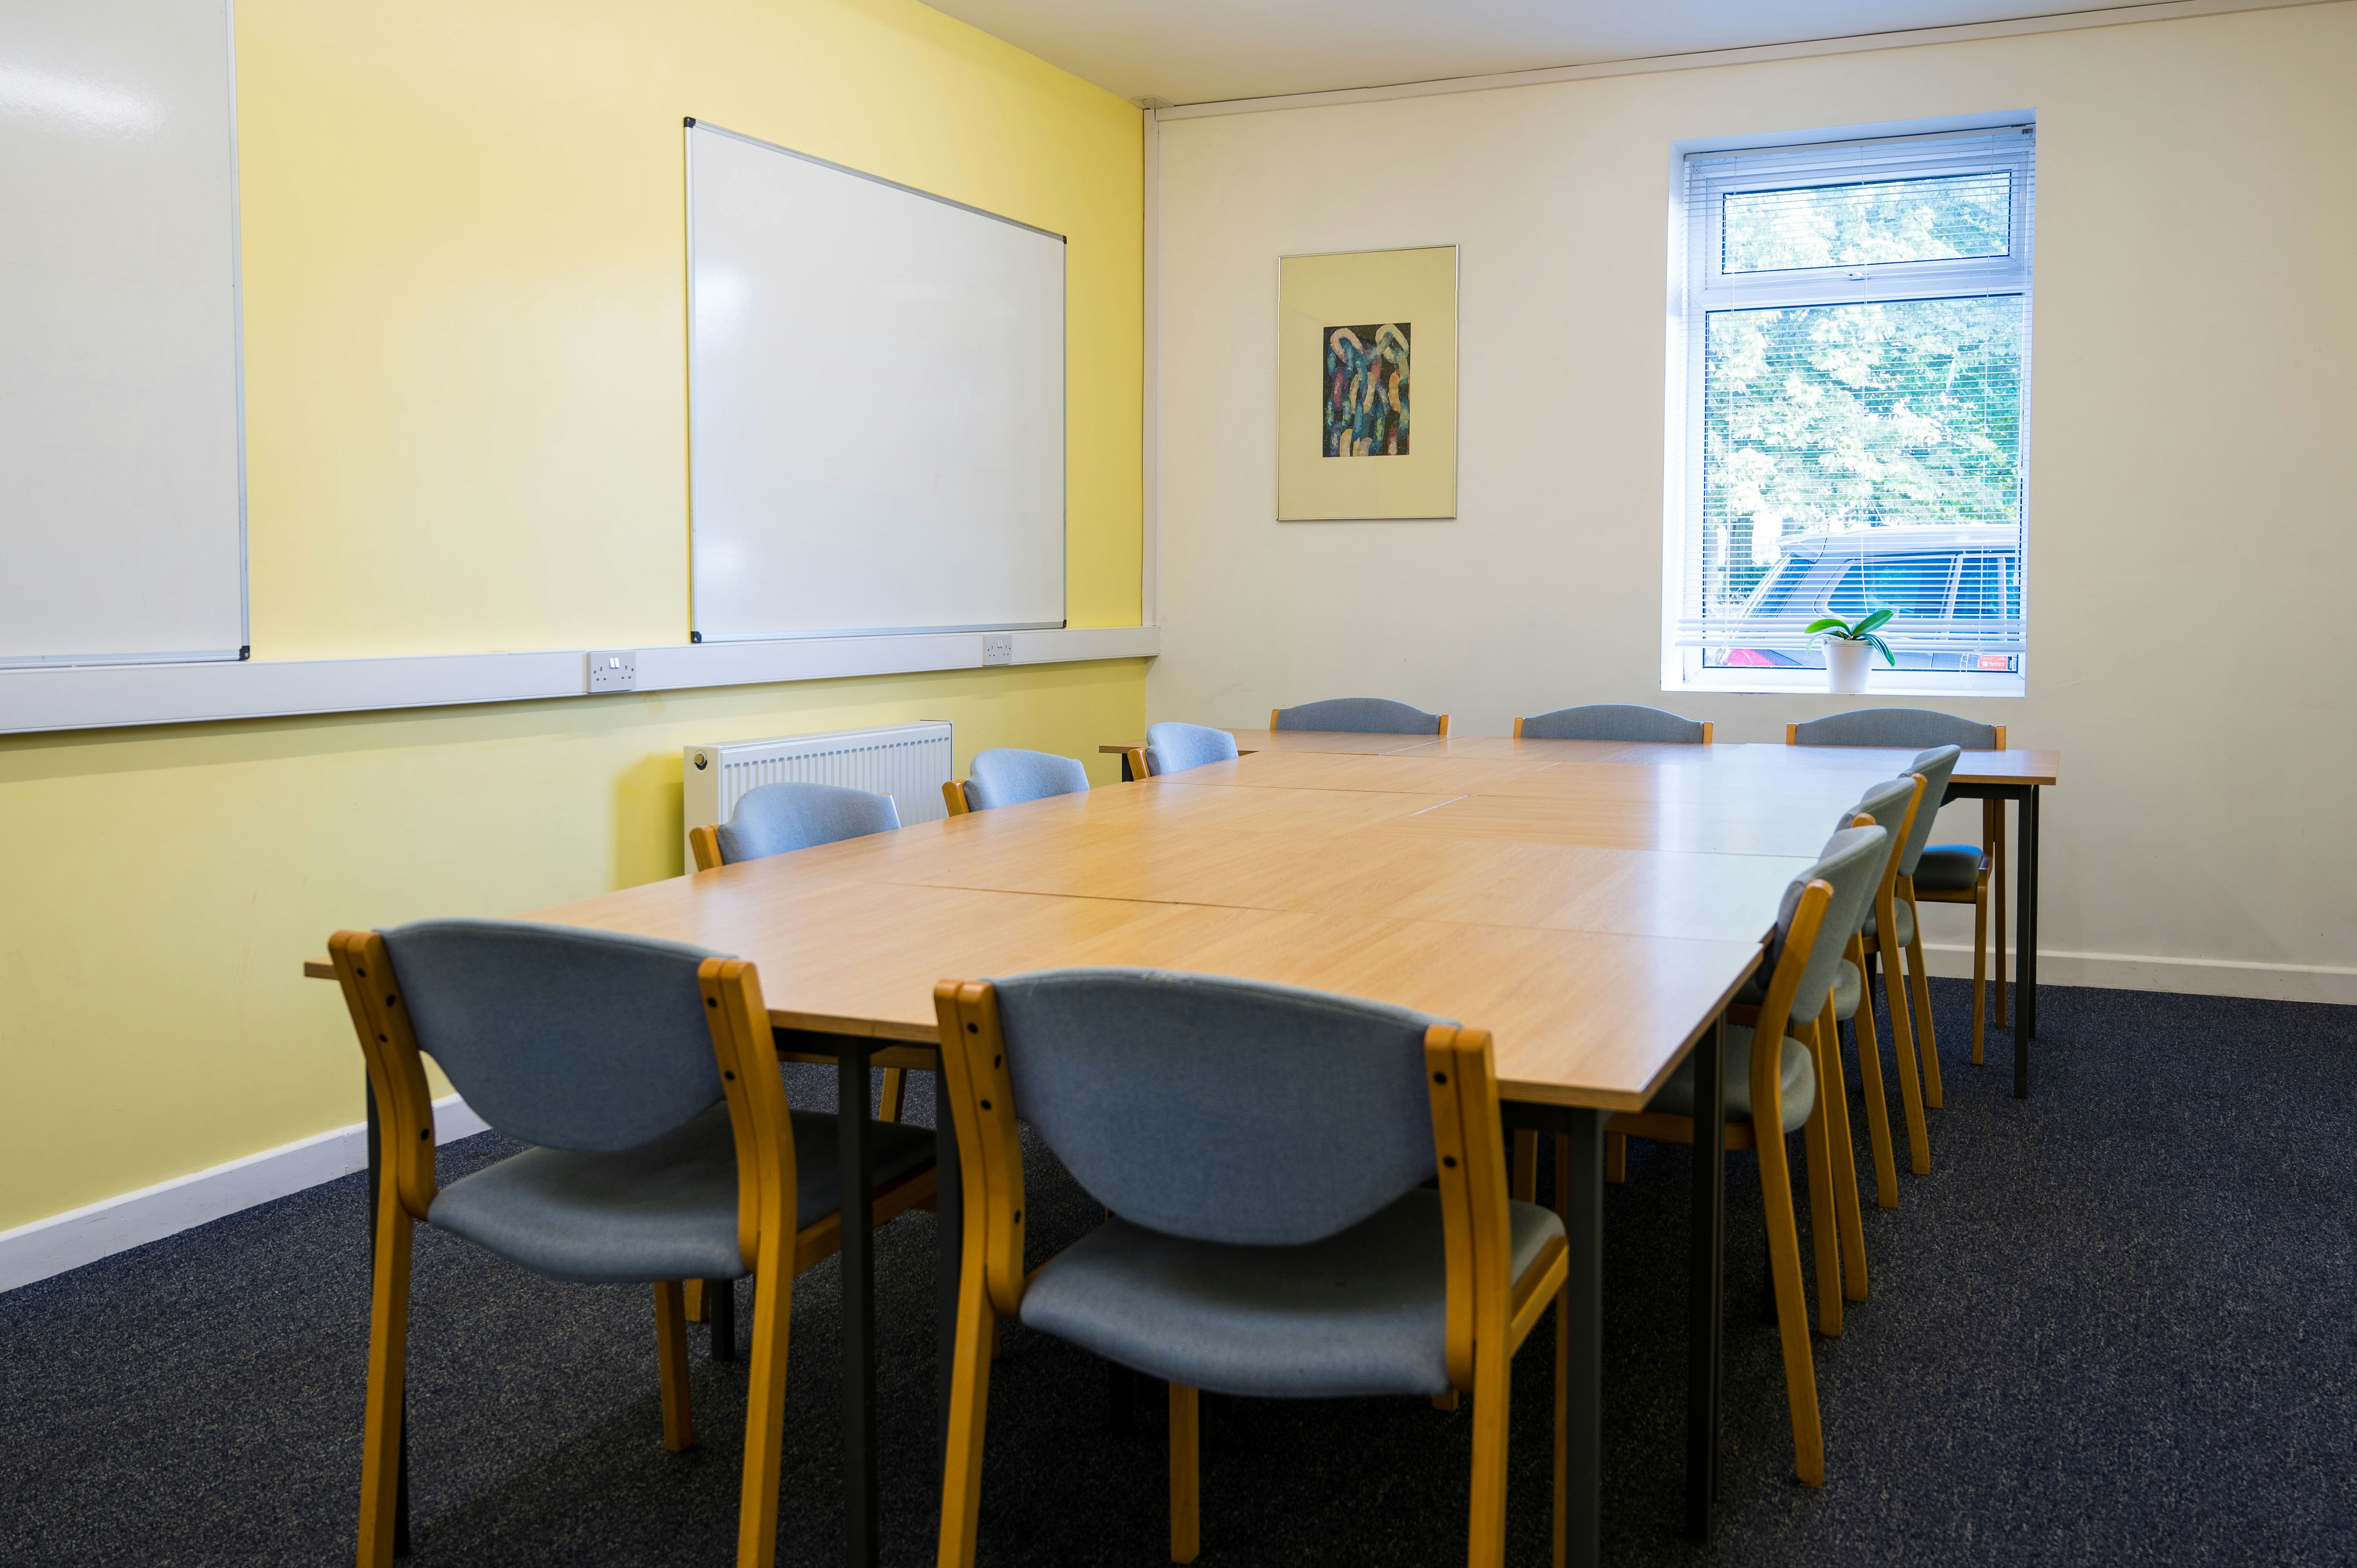 Wesley House, Salford, Manchester - Training Room 1 image 4